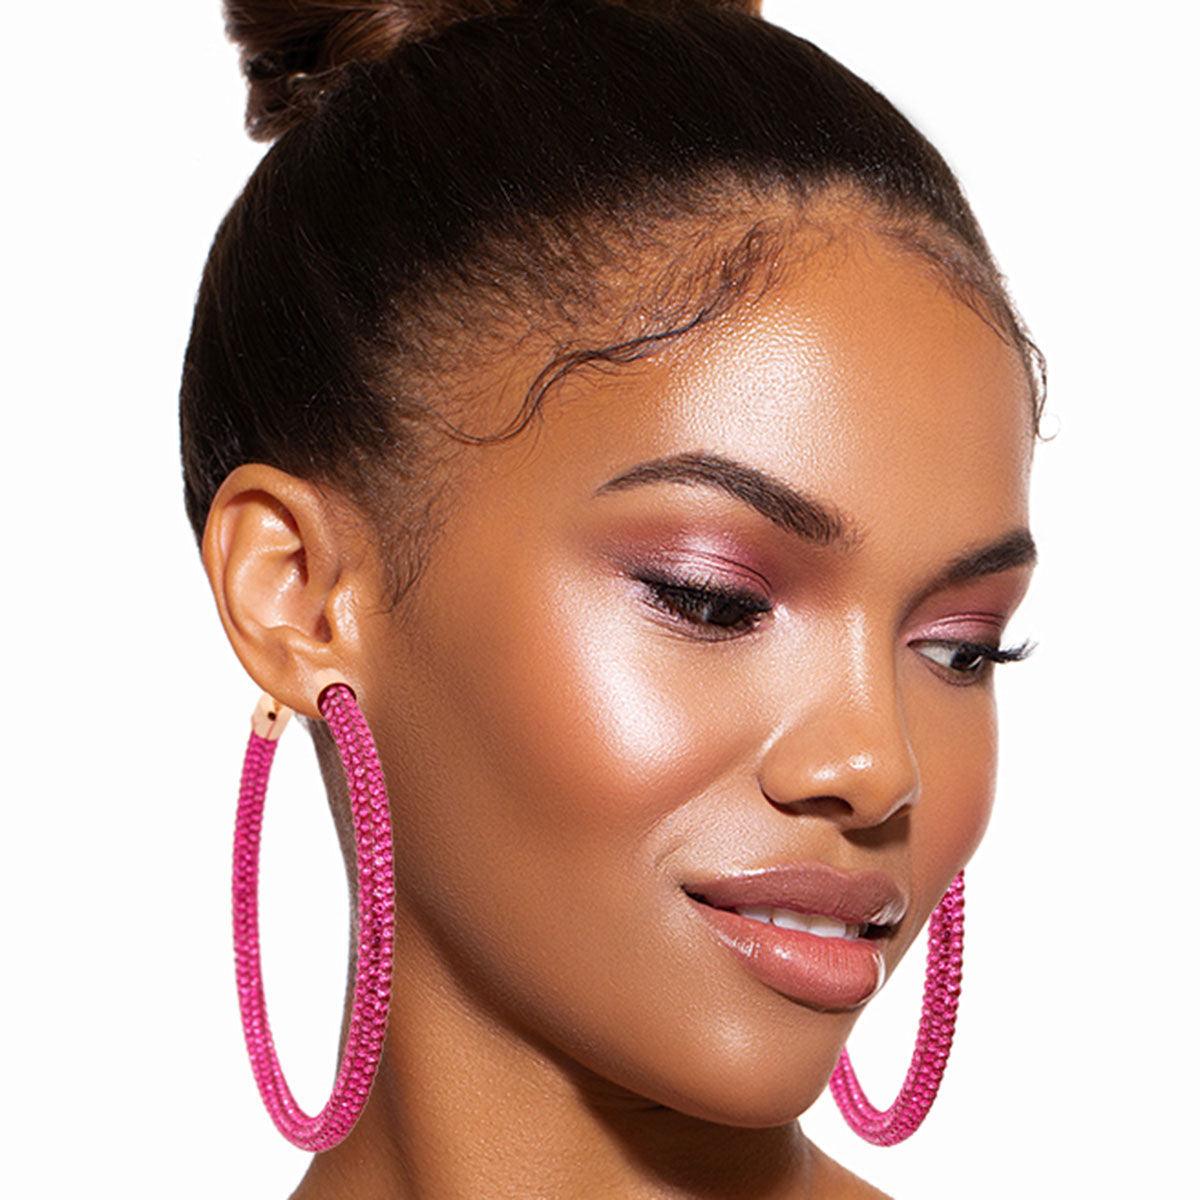 Make a Bold Fashion Statement with Pink Hoop Earrings -Buy Now!